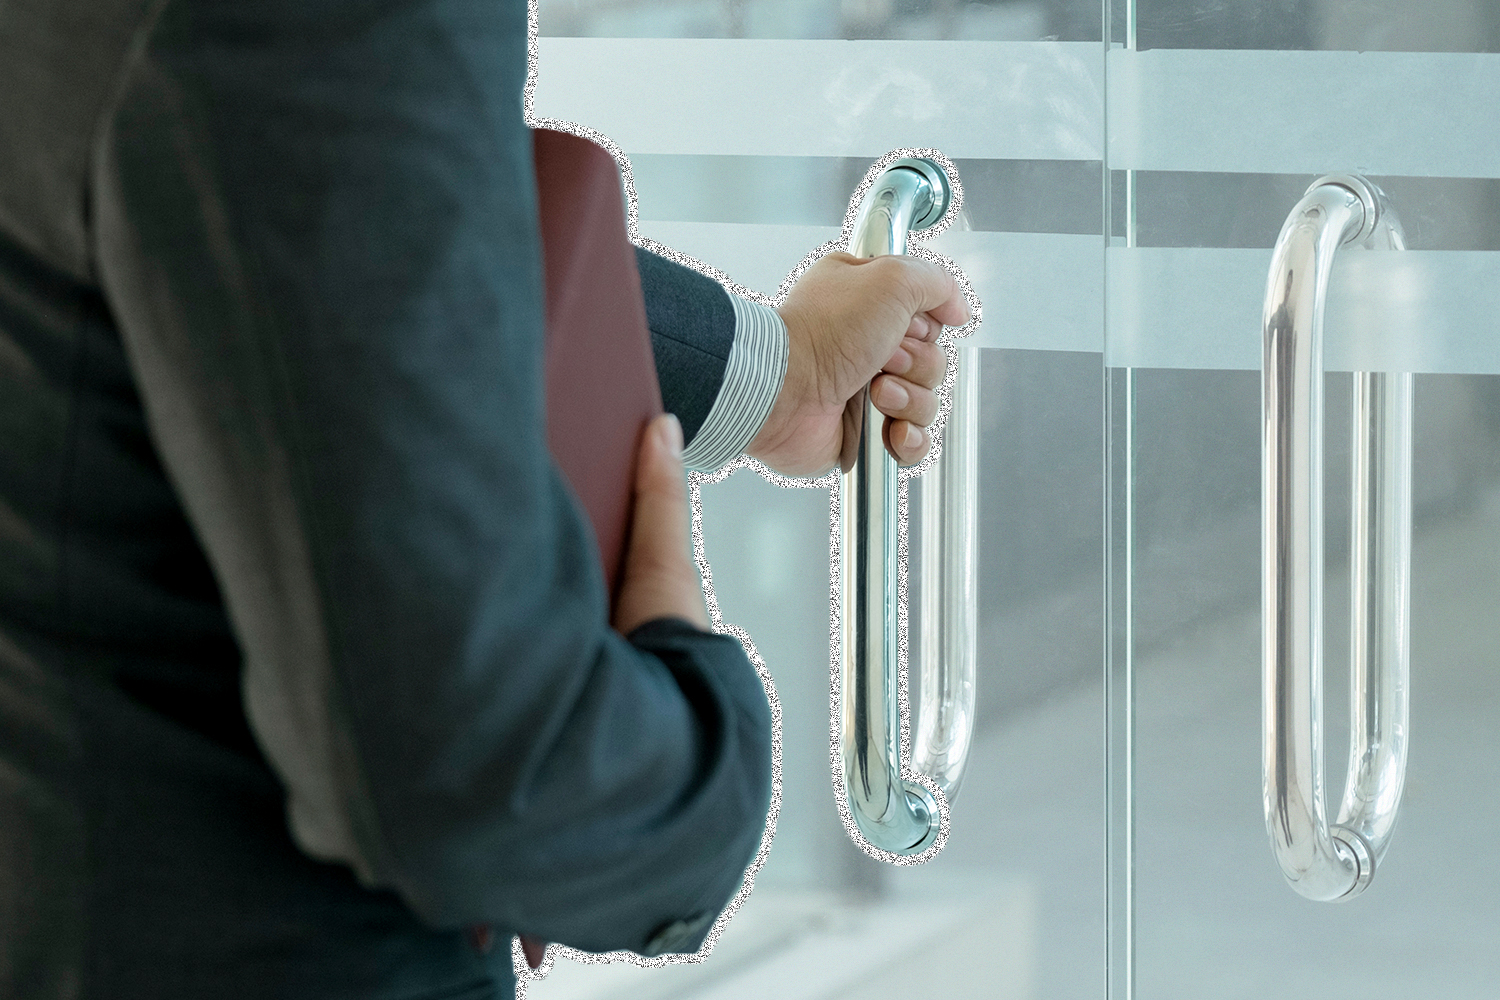 A person in a business suit with a briefcase in one hand and opening a glass door with the other hand.